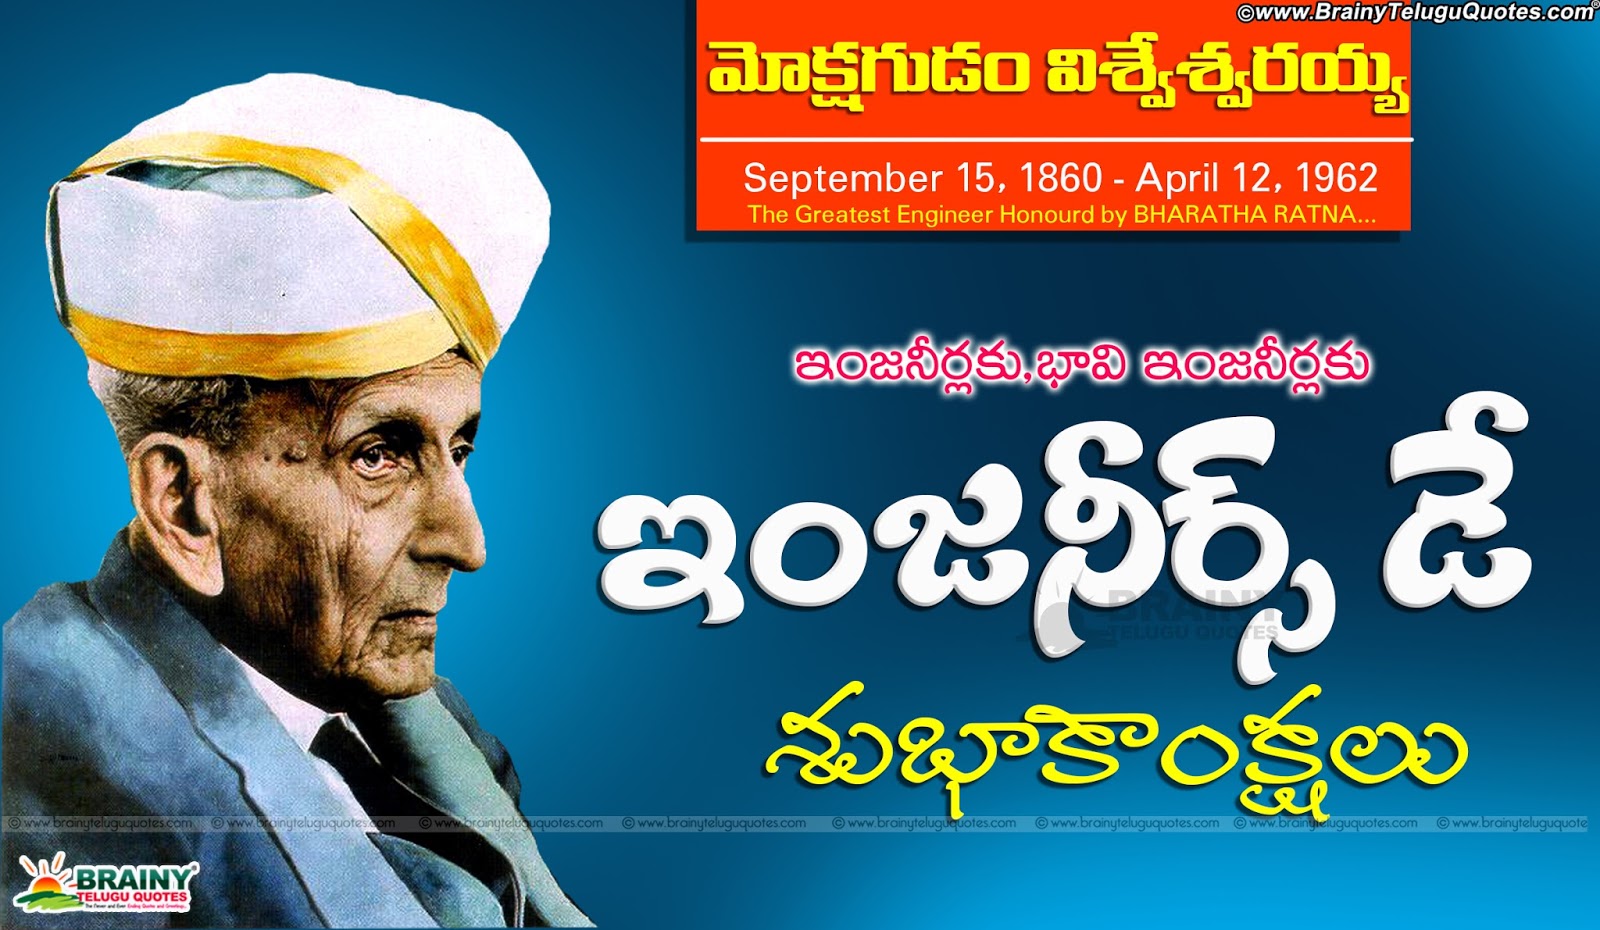 Happy Engineers Day 2016 Quotes Messages And Greetings In Telugu